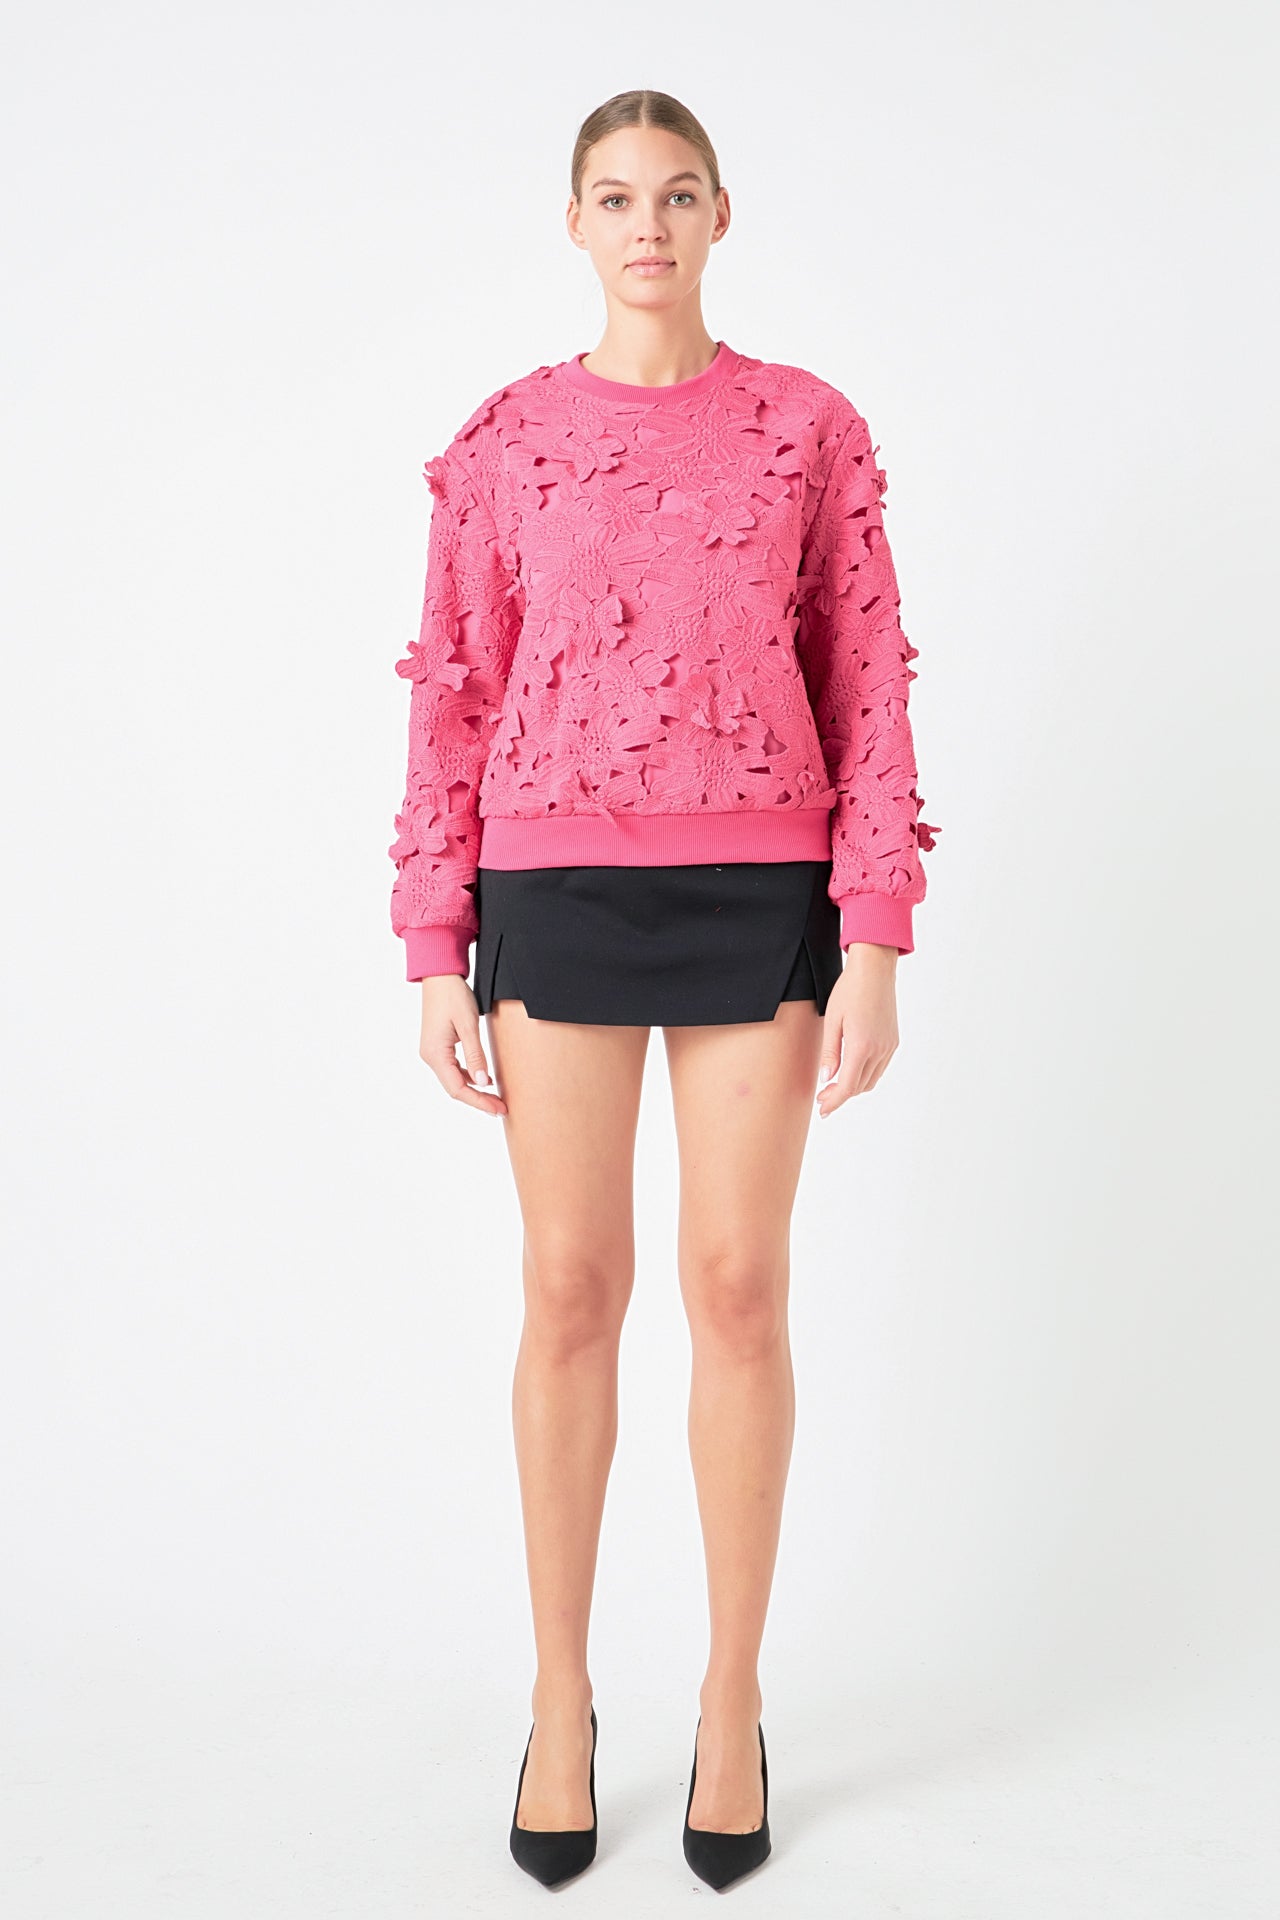 ENDLESS ROSE - Floral Lace Sweater - HOODIES &SWEATSHIRTS available at Objectrare